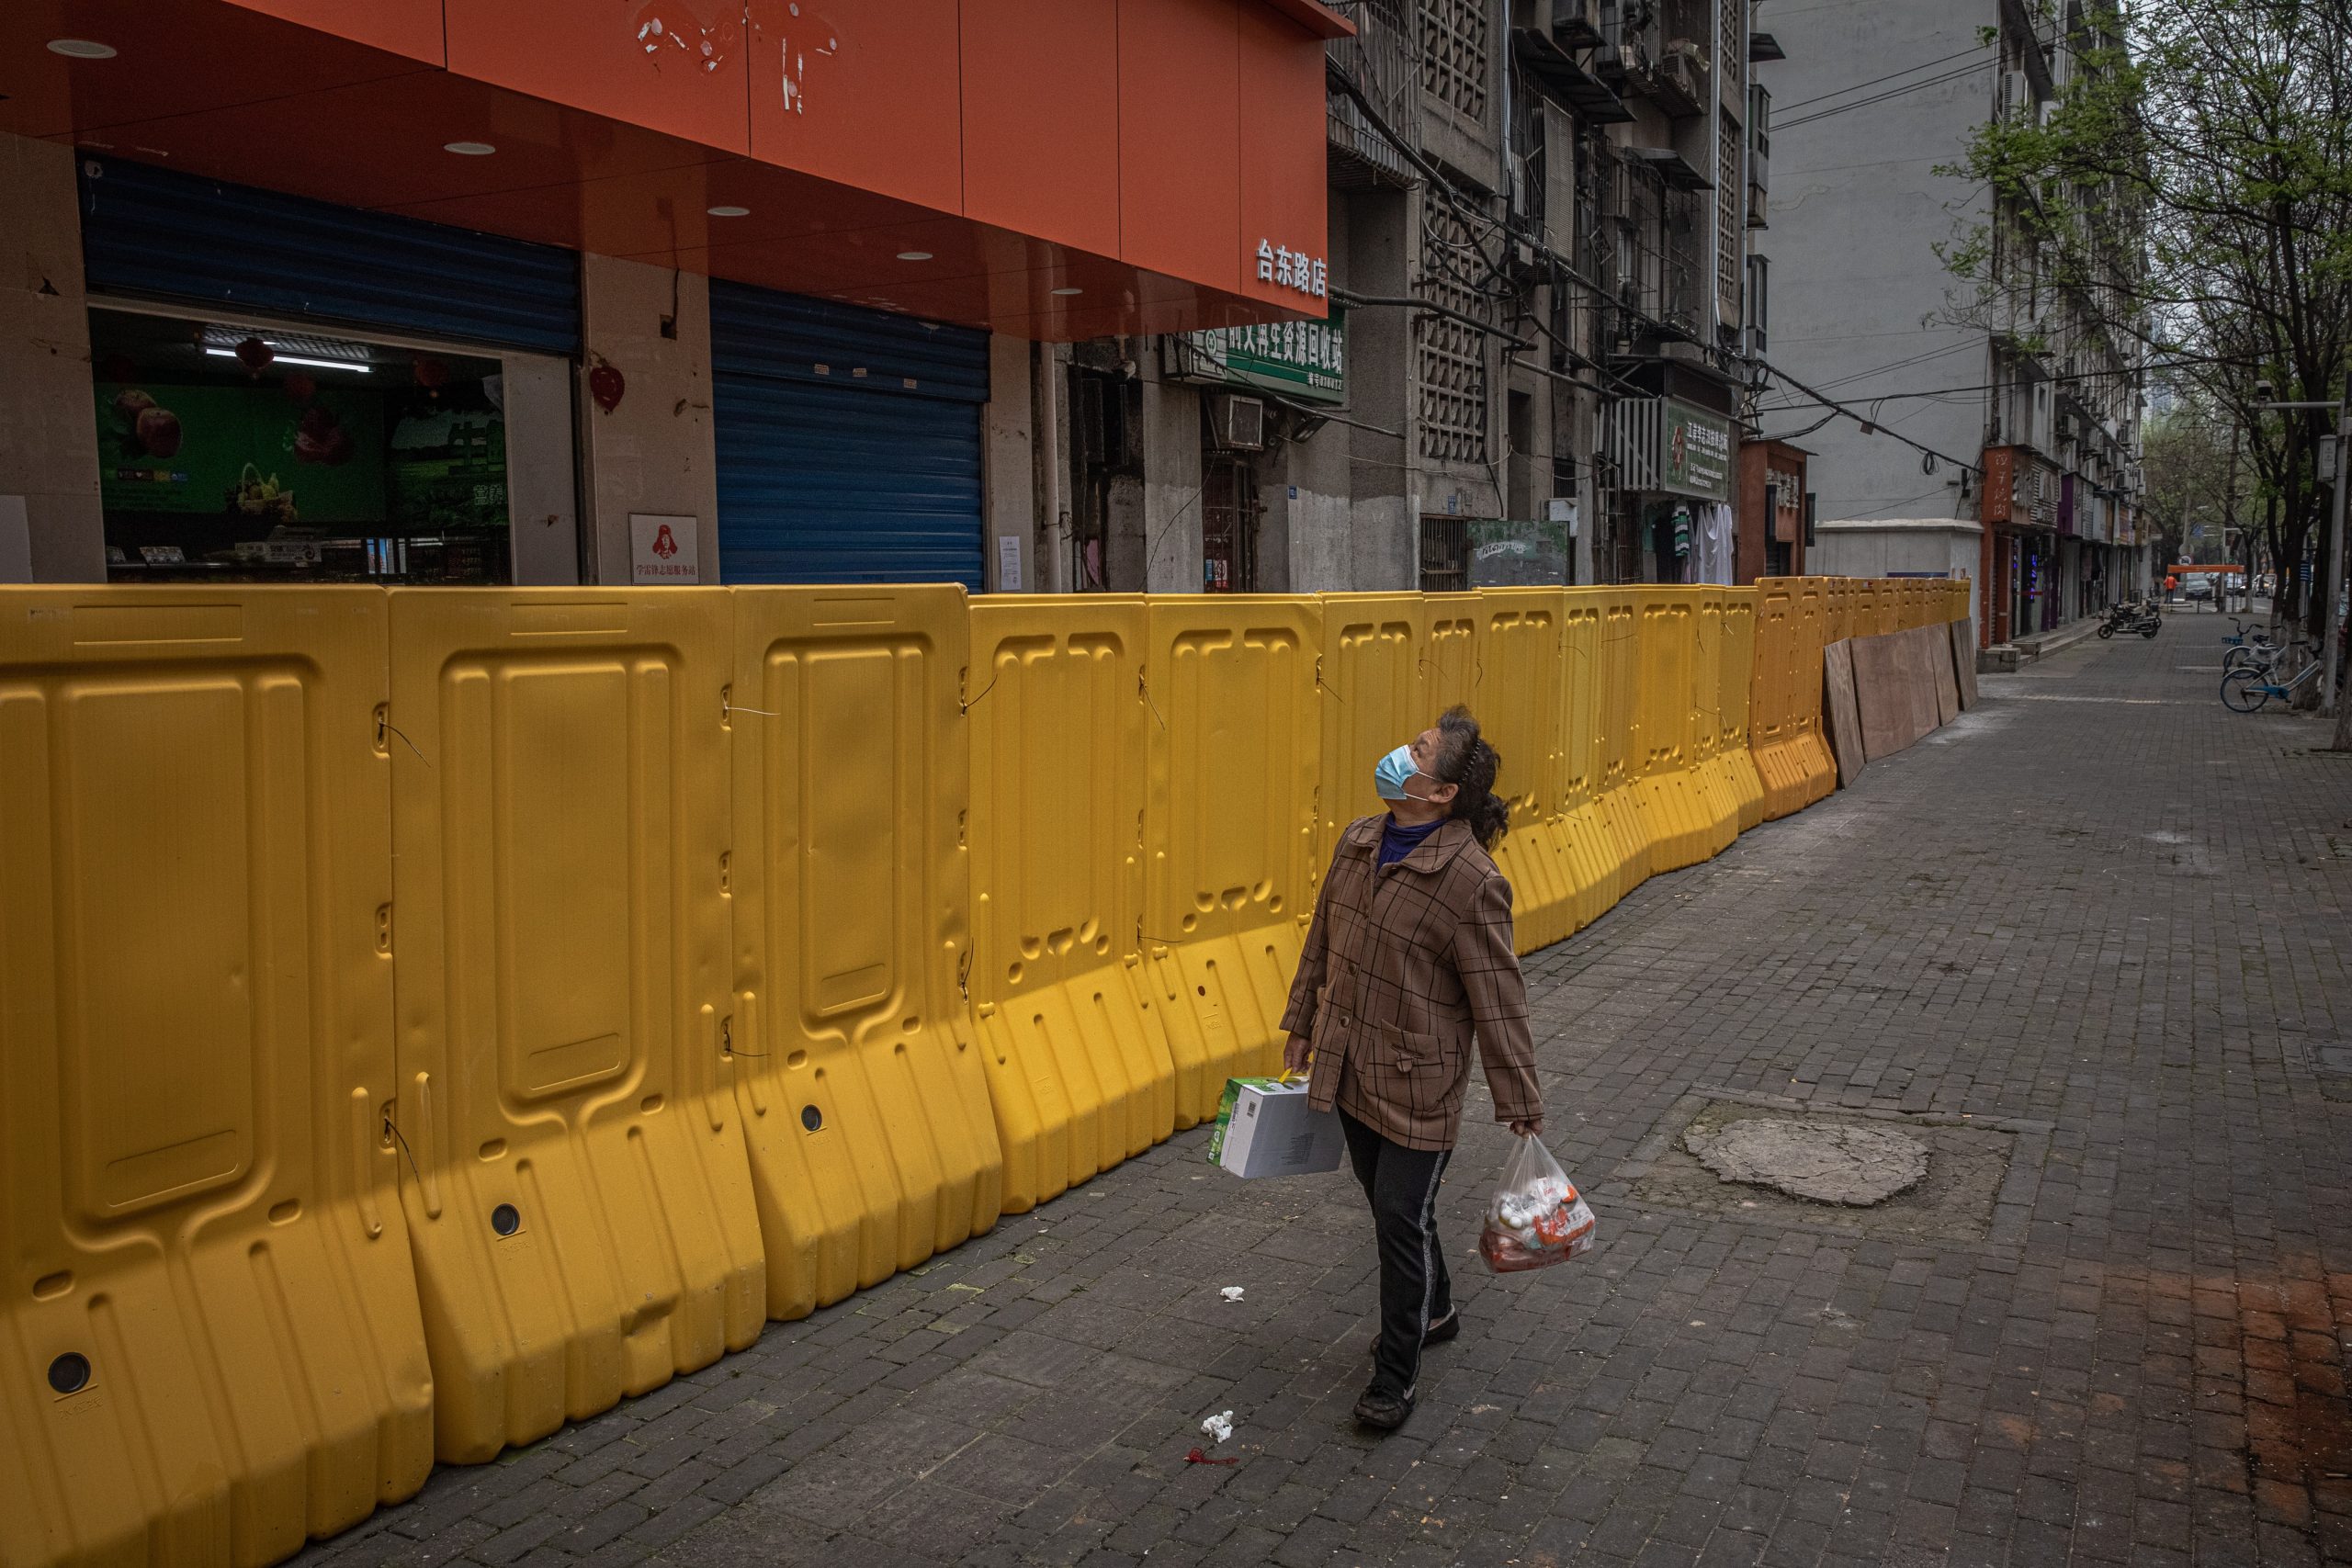 epa08354679 A woman wearing a protective face mask walks next to a security fence separating a residential area from a street, in Wuhan, China, 10 April 2020. Wuhan, the epicenter of the coronavirus outbreak, lifted the lockdown on 08 April 2020, allowing people to leave the city after more than two months.  EPA/ROMAN PILIPEY